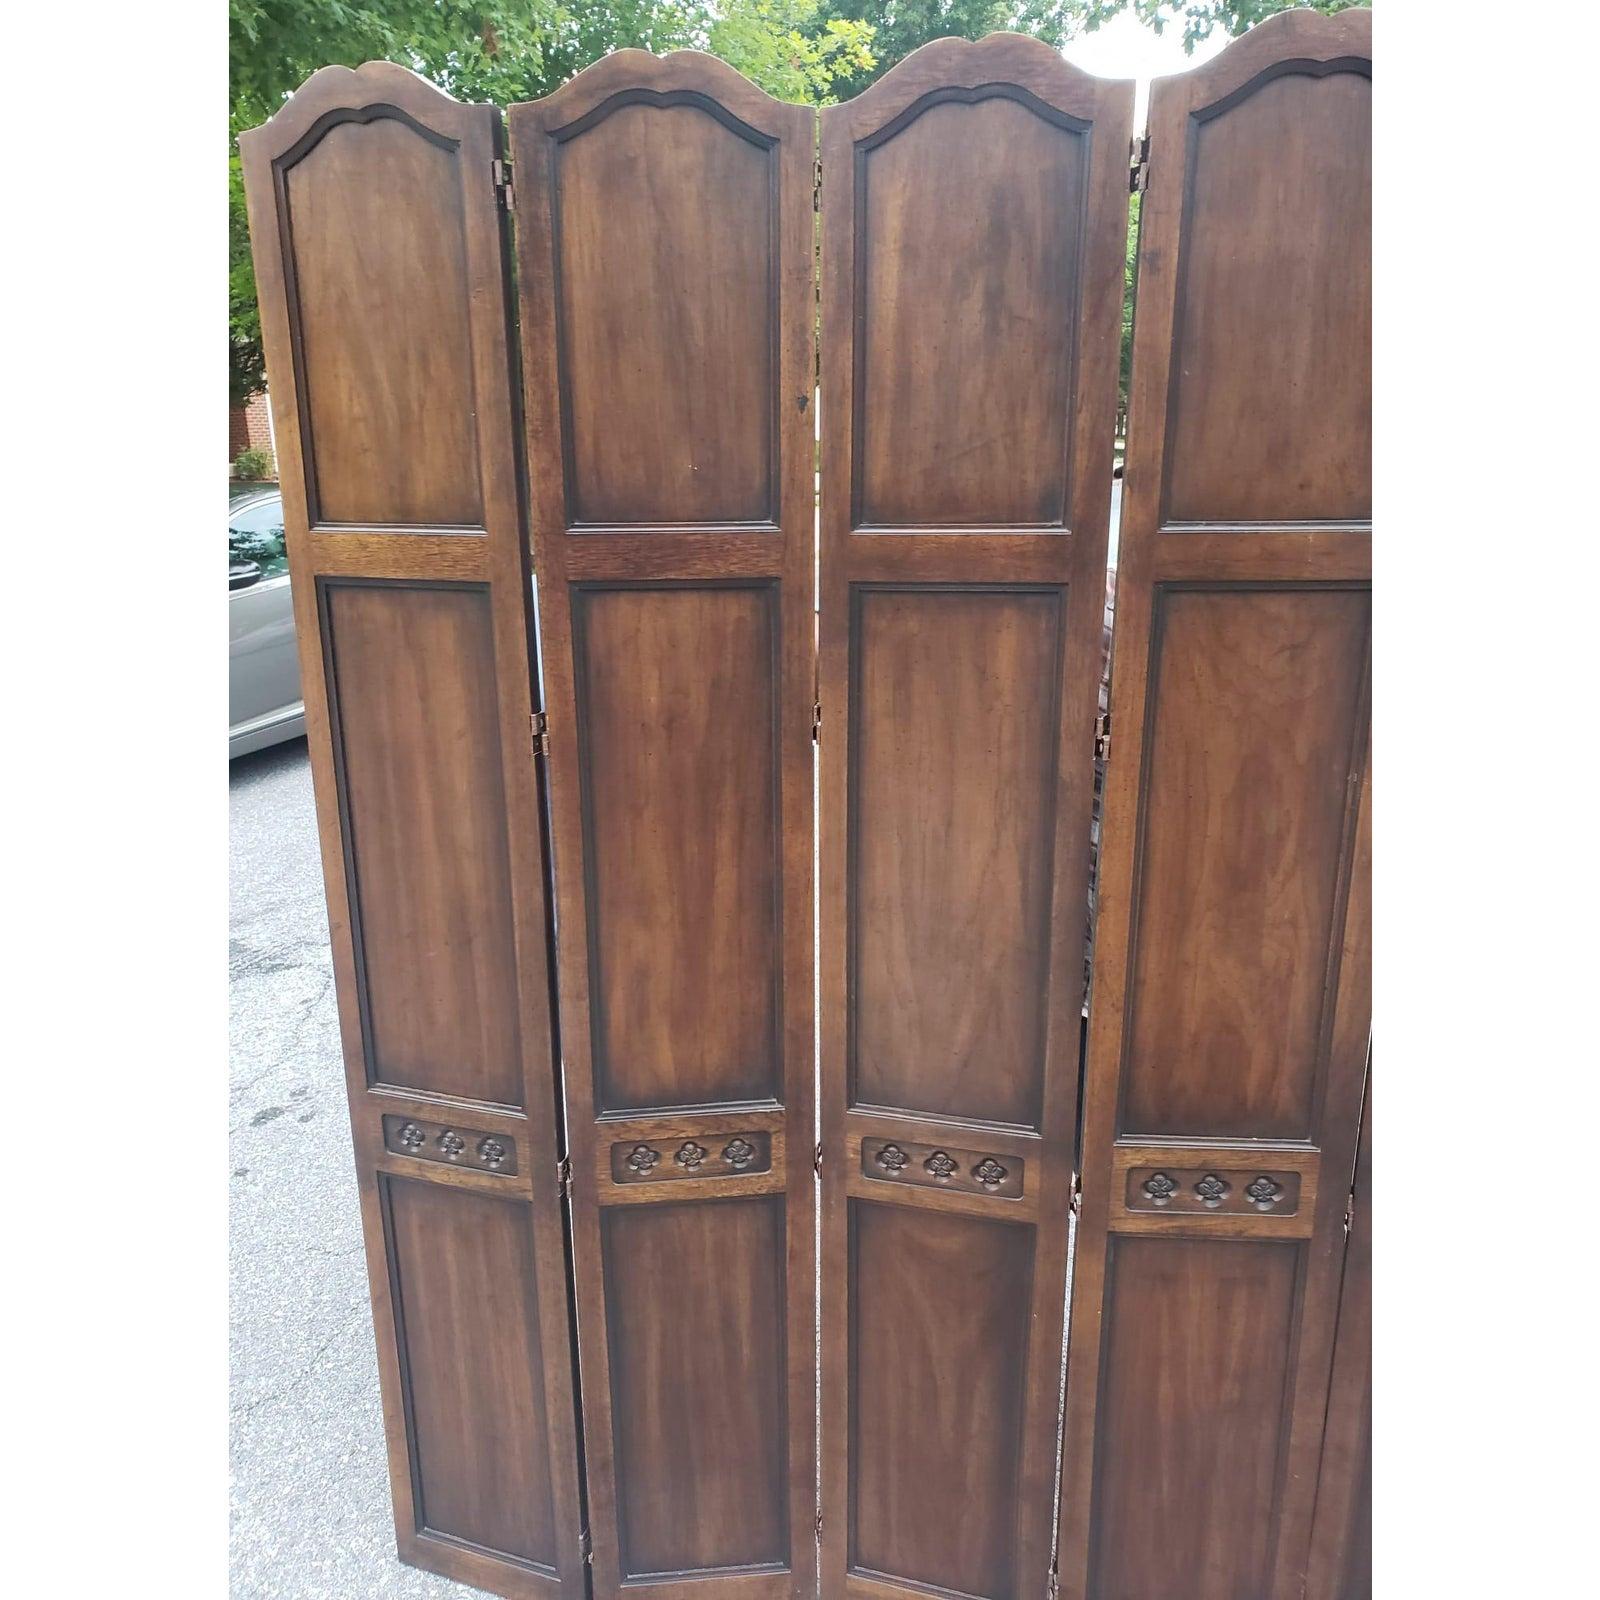 Carved solid walnut room divider in excellent condition. Comes in 5 panels with hinges. Each panel measures 60